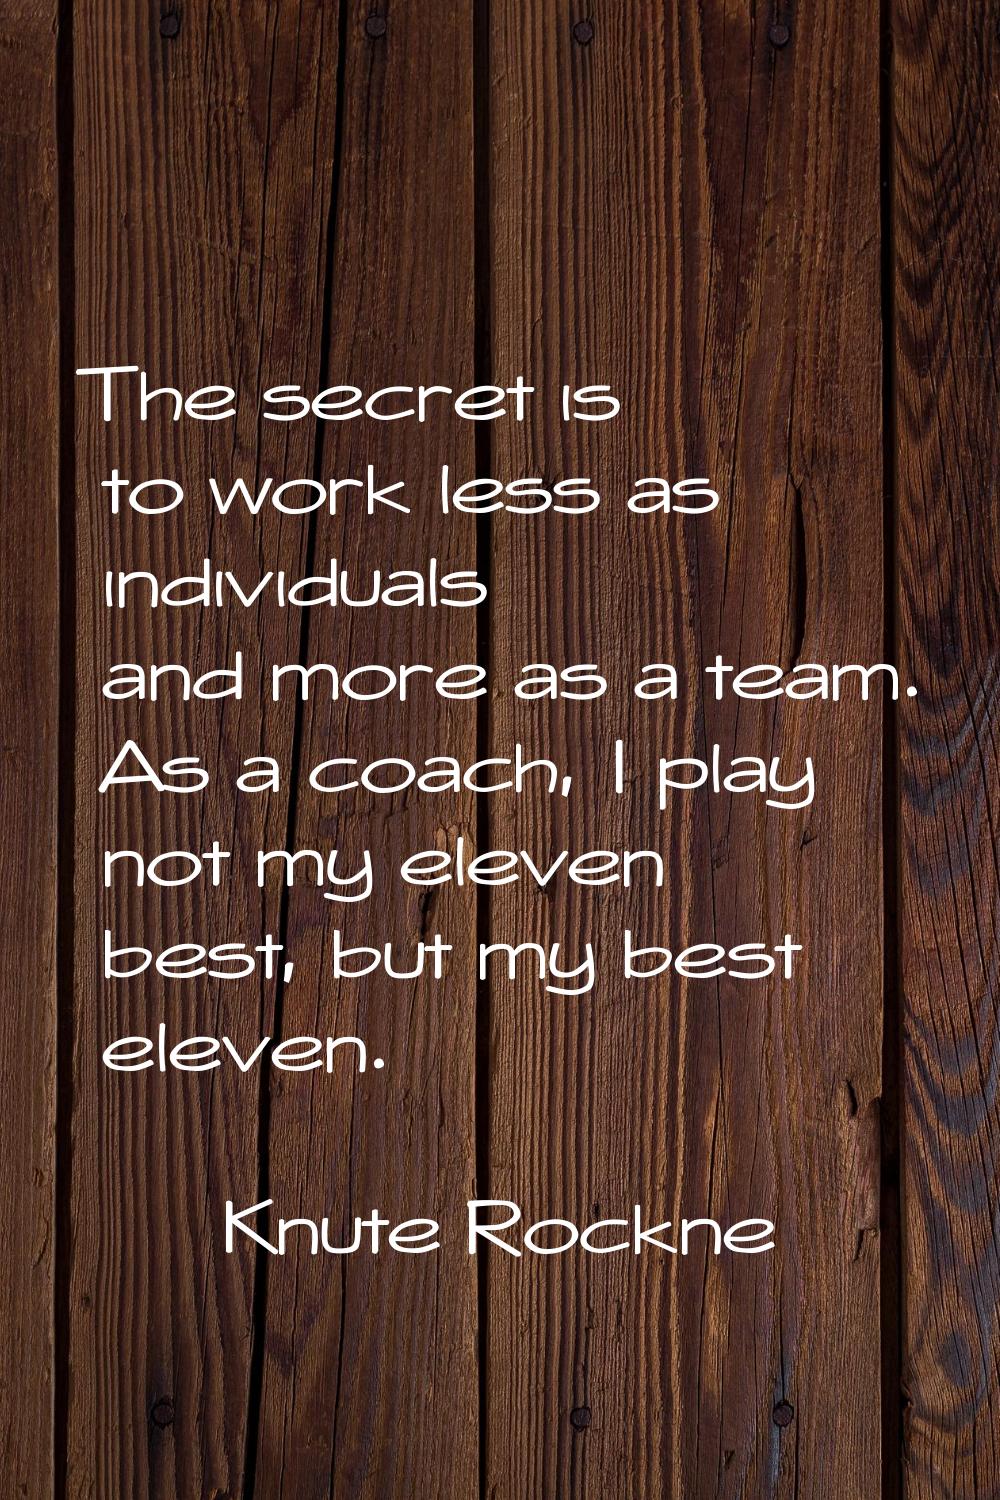 The secret is to work less as individuals and more as a team. As a coach, I play not my eleven best